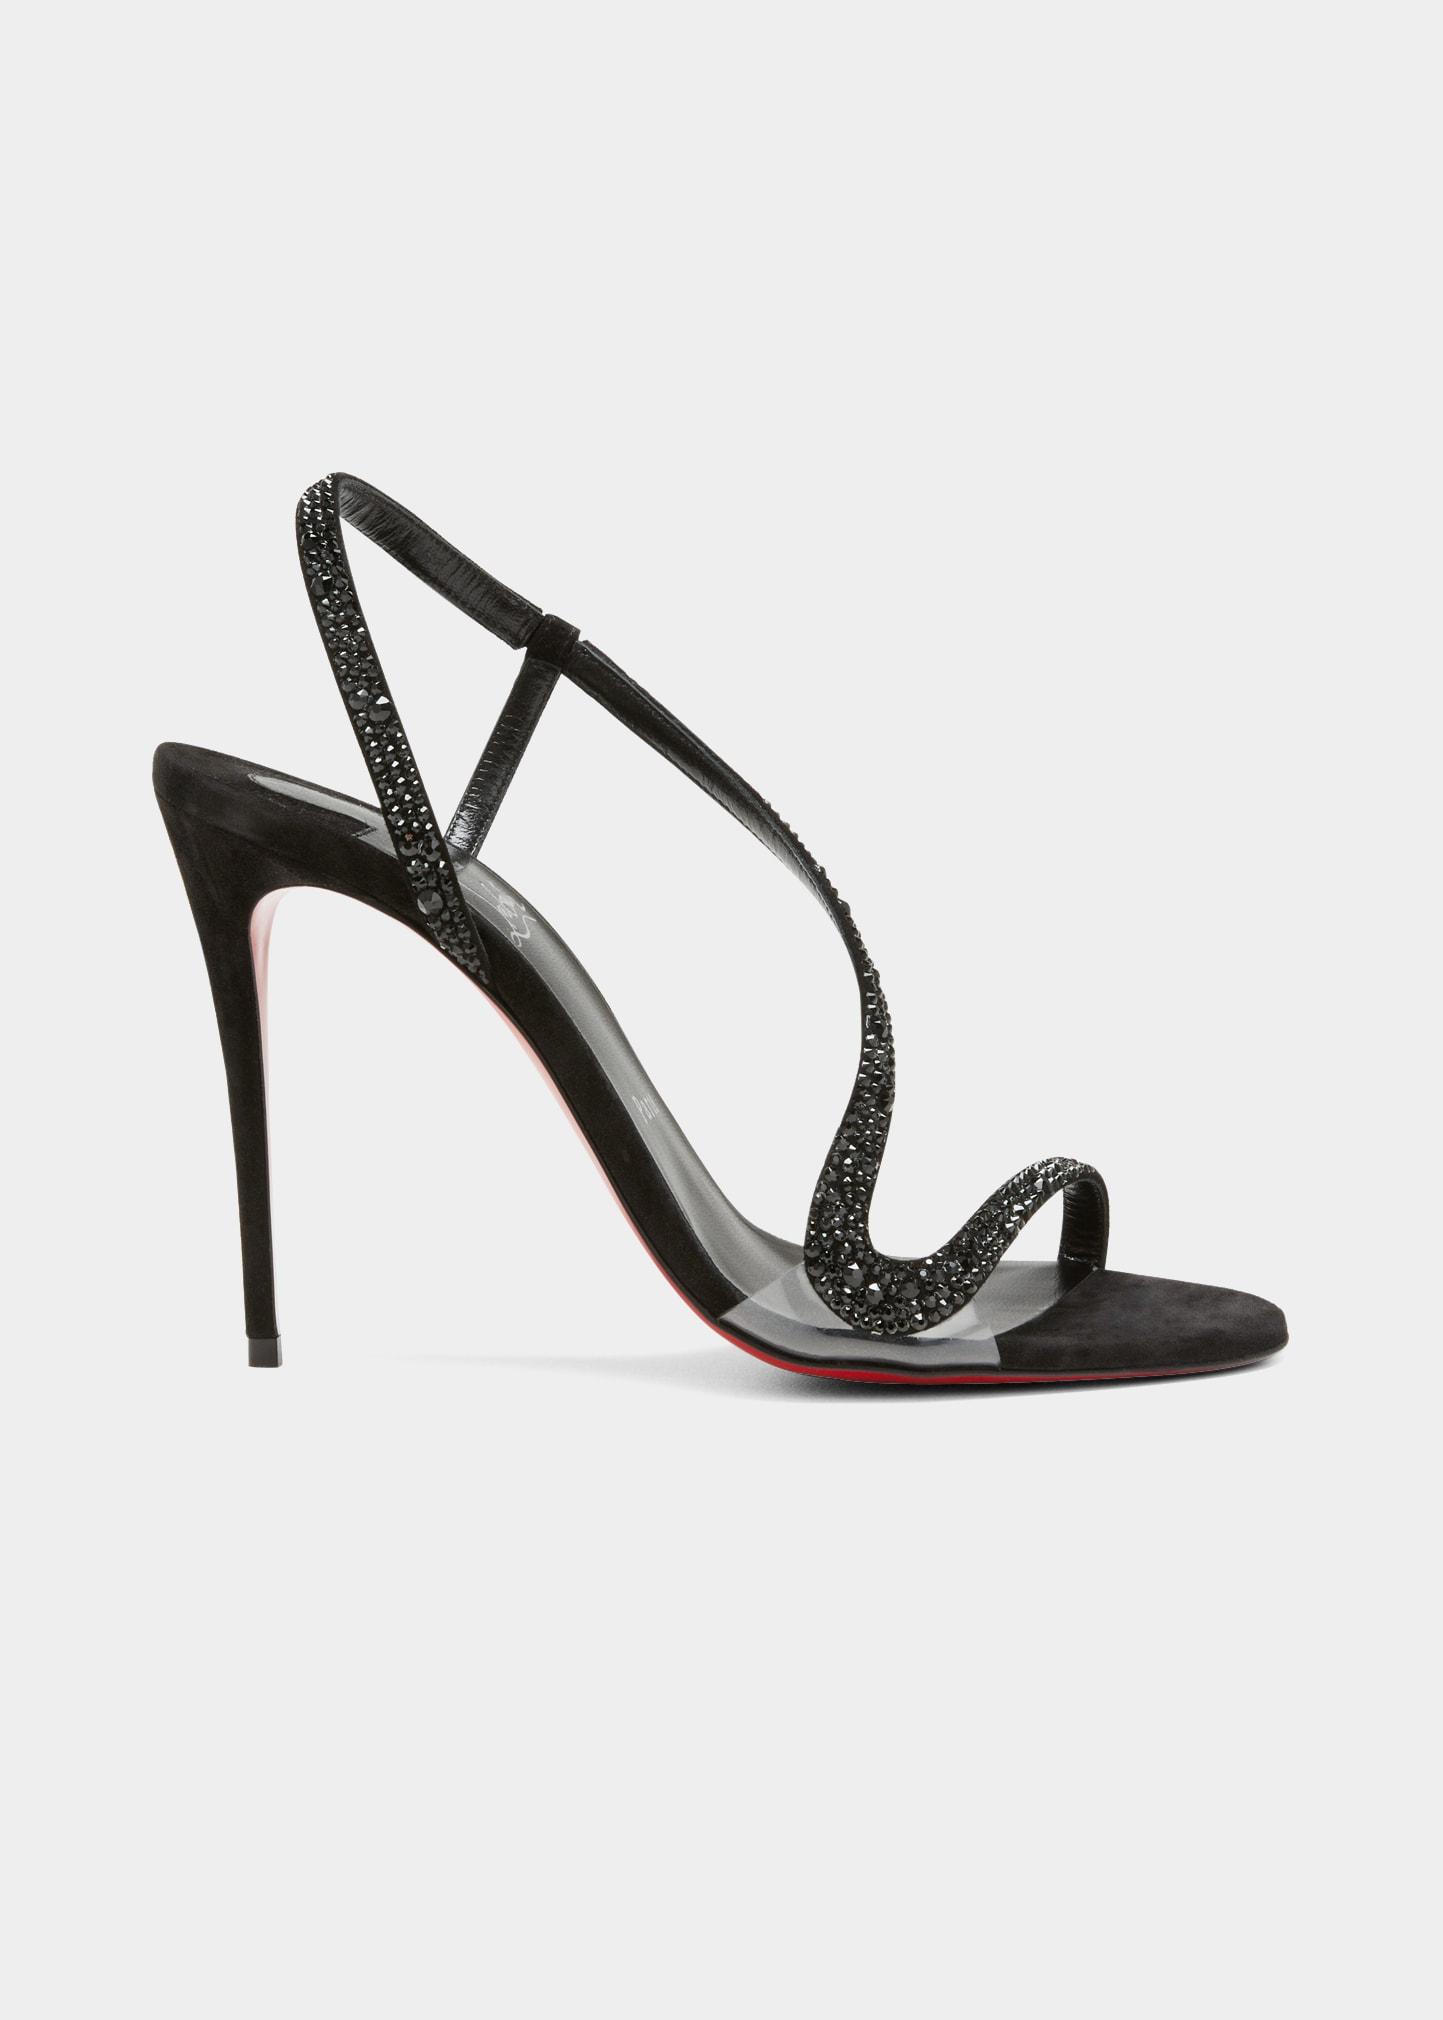 Christian Louboutin Rosalie Strass Red Sole Stiletto Sandals in ...